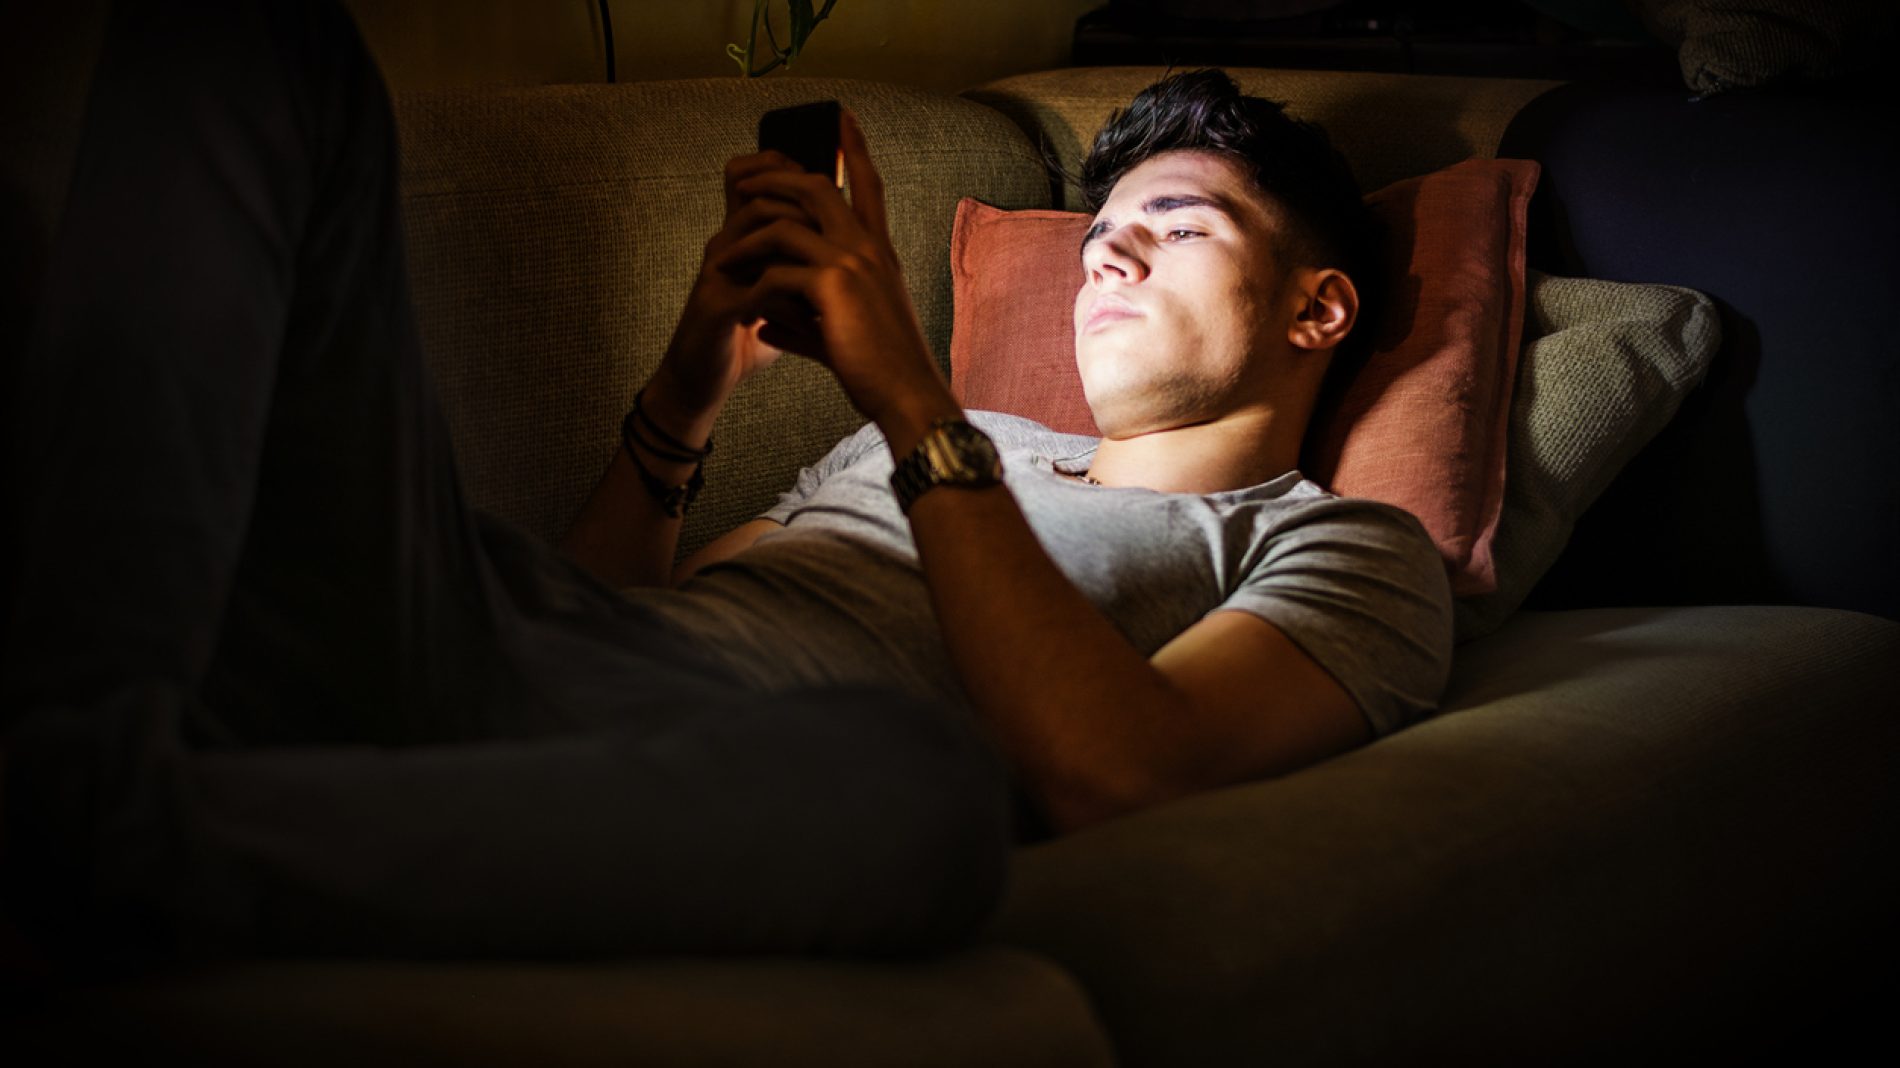 Young Man on Sofa Lit by Light from Cell Phone